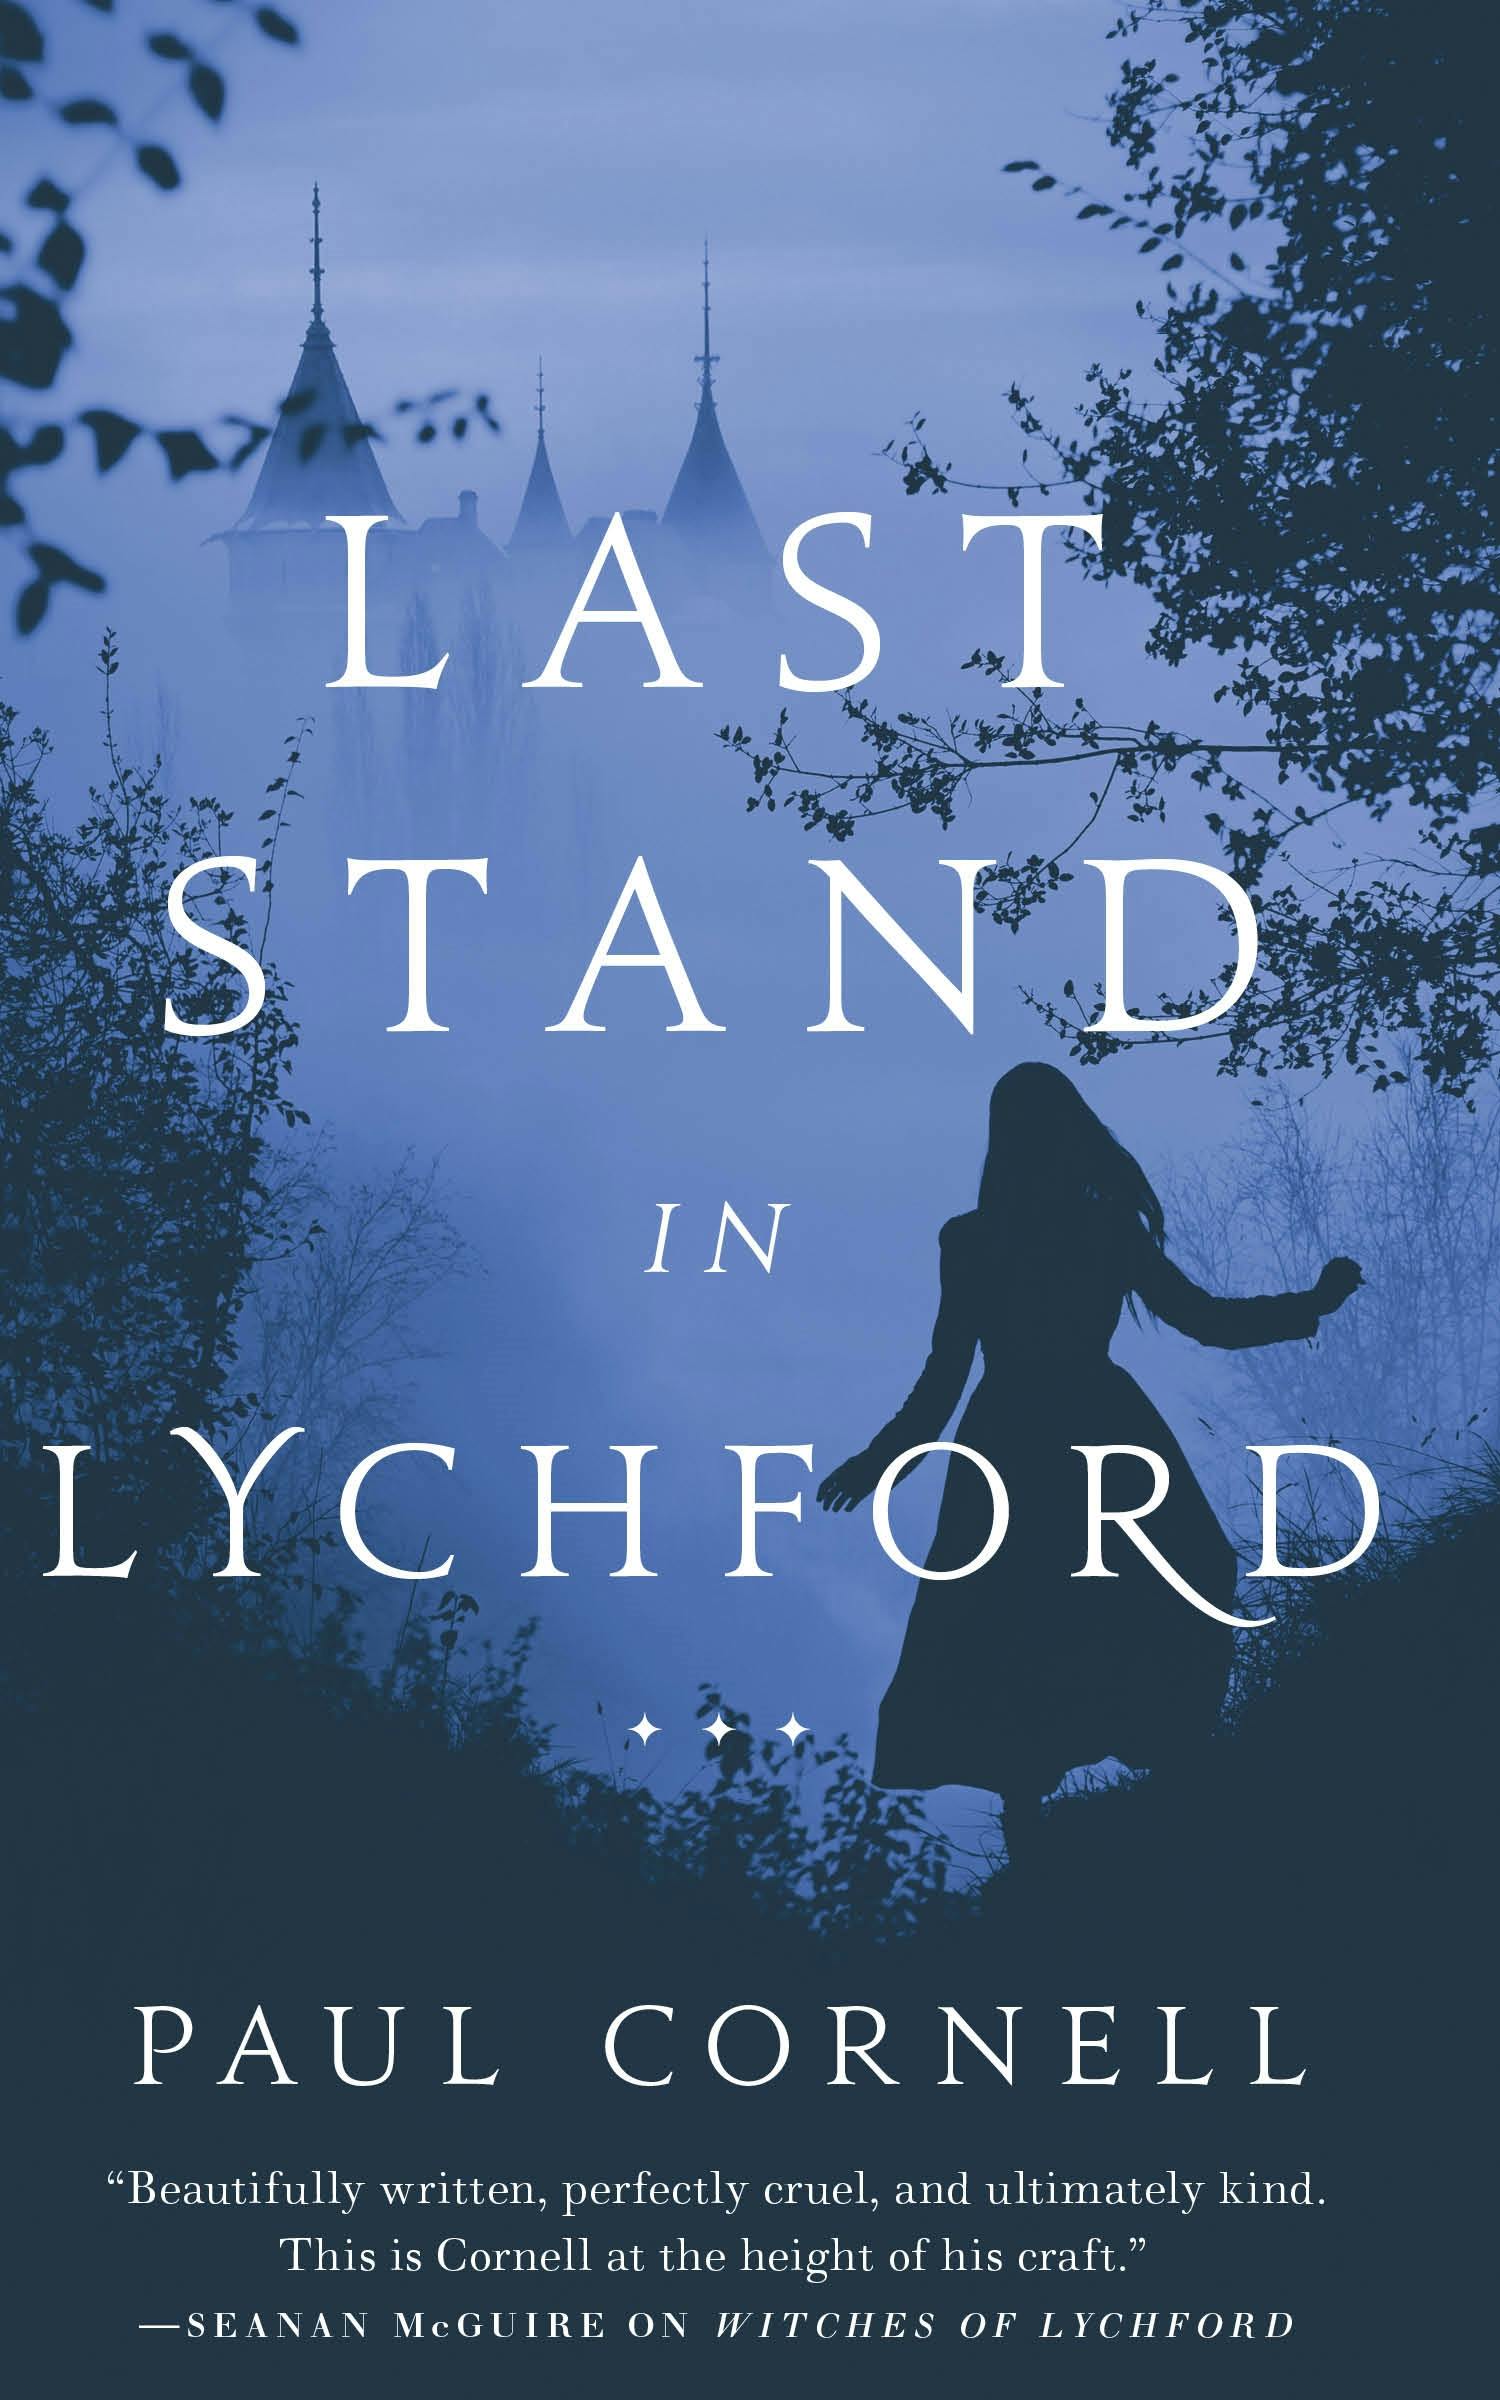 Cover for the book titled as: Last Stand in Lychford